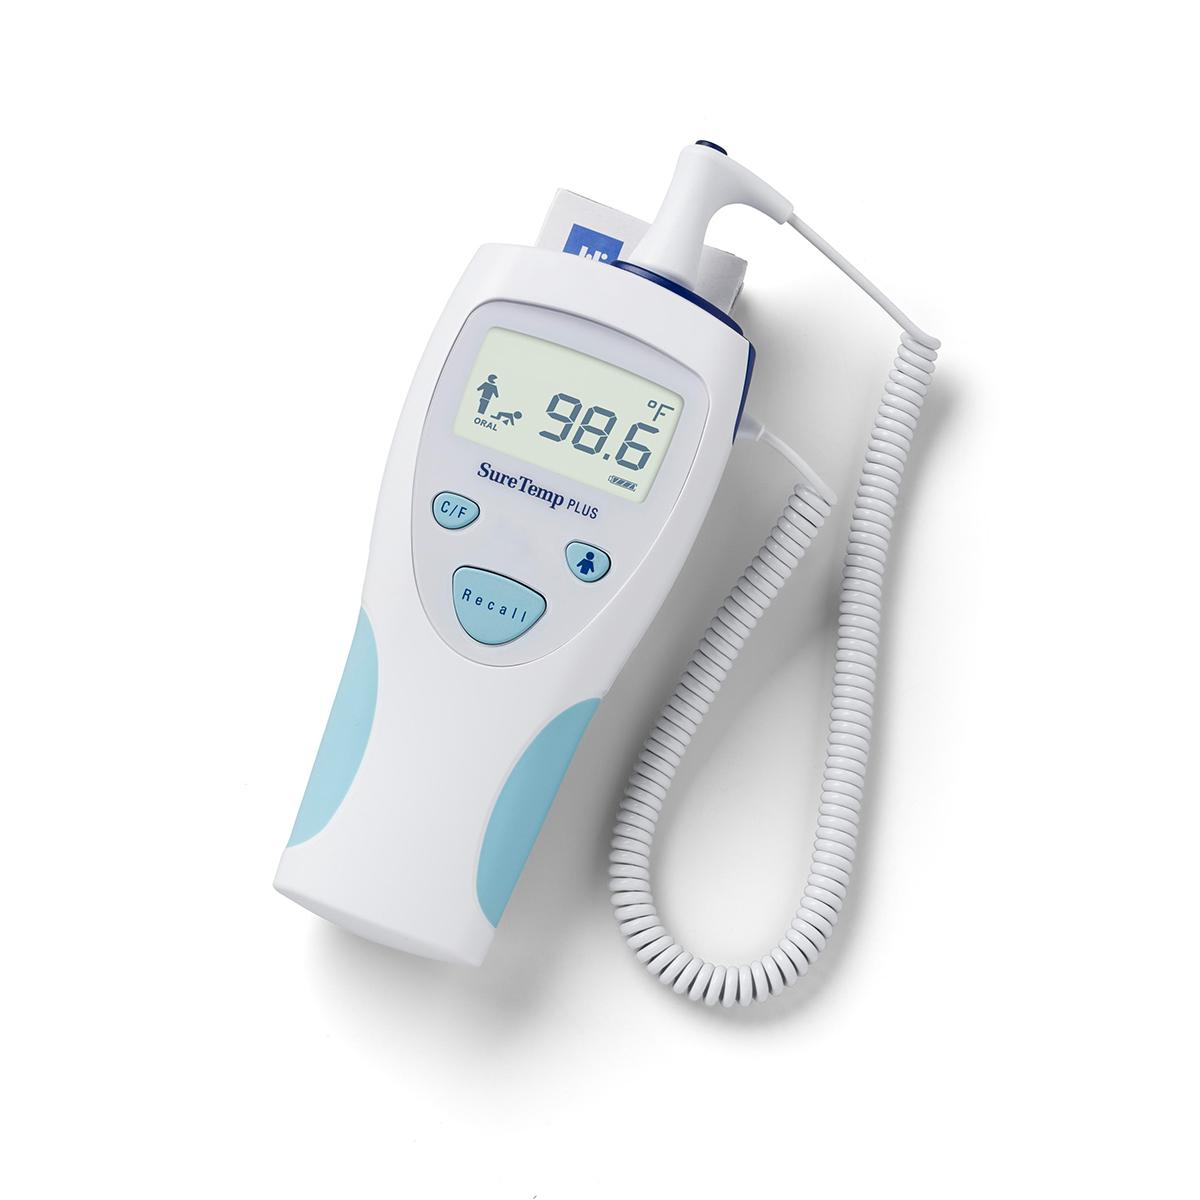 Welch Allyn SureTemp Plus 690 Hand-Held Digital Thermometer - an oral and rectal thermometer